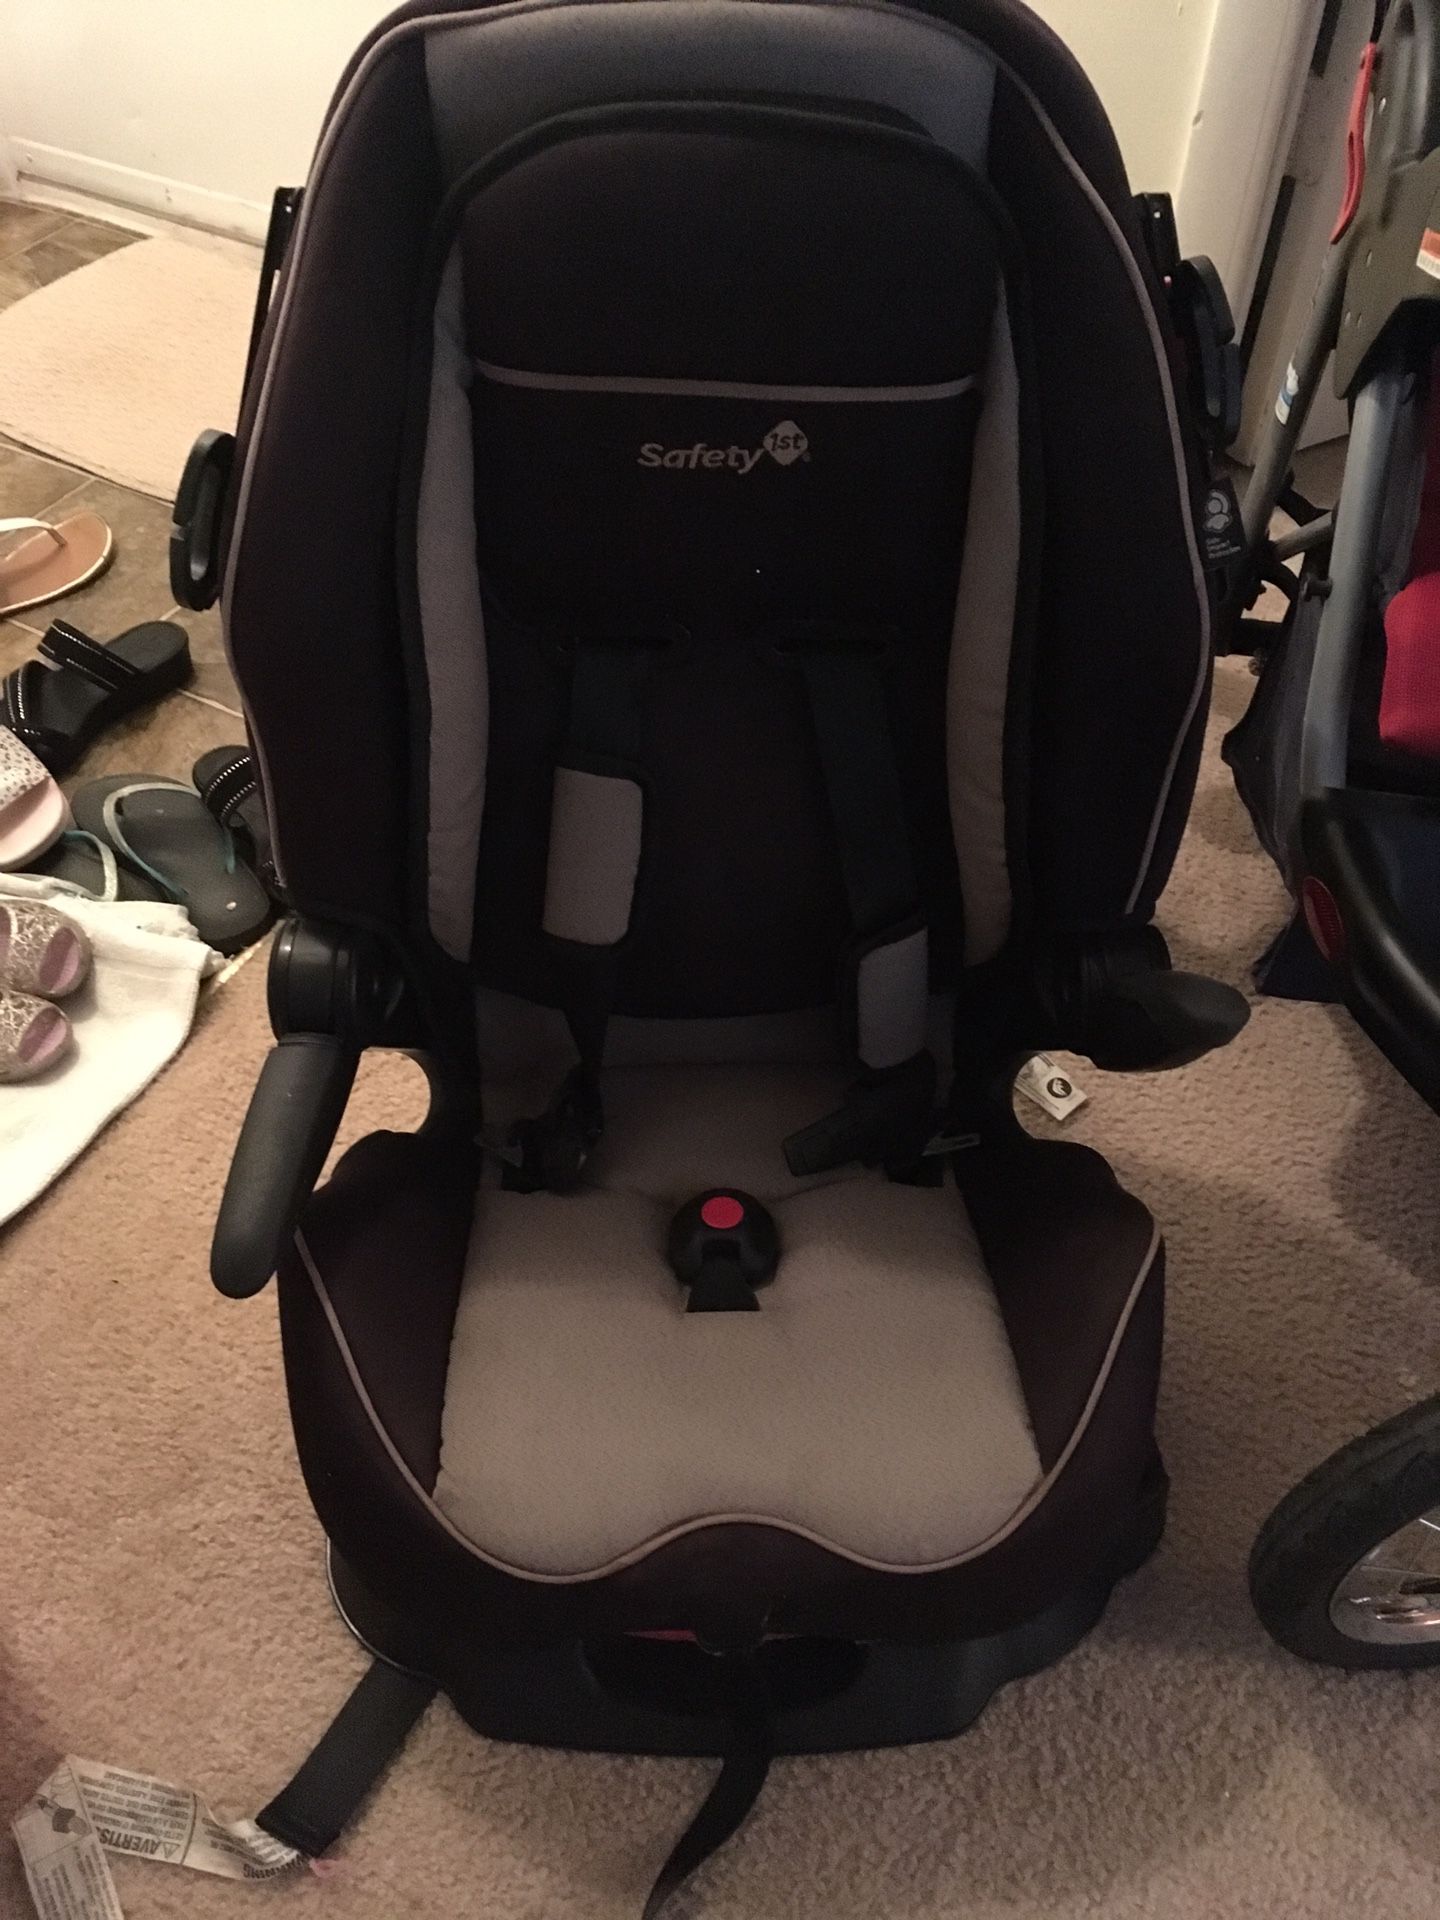 Safety first baby car seat